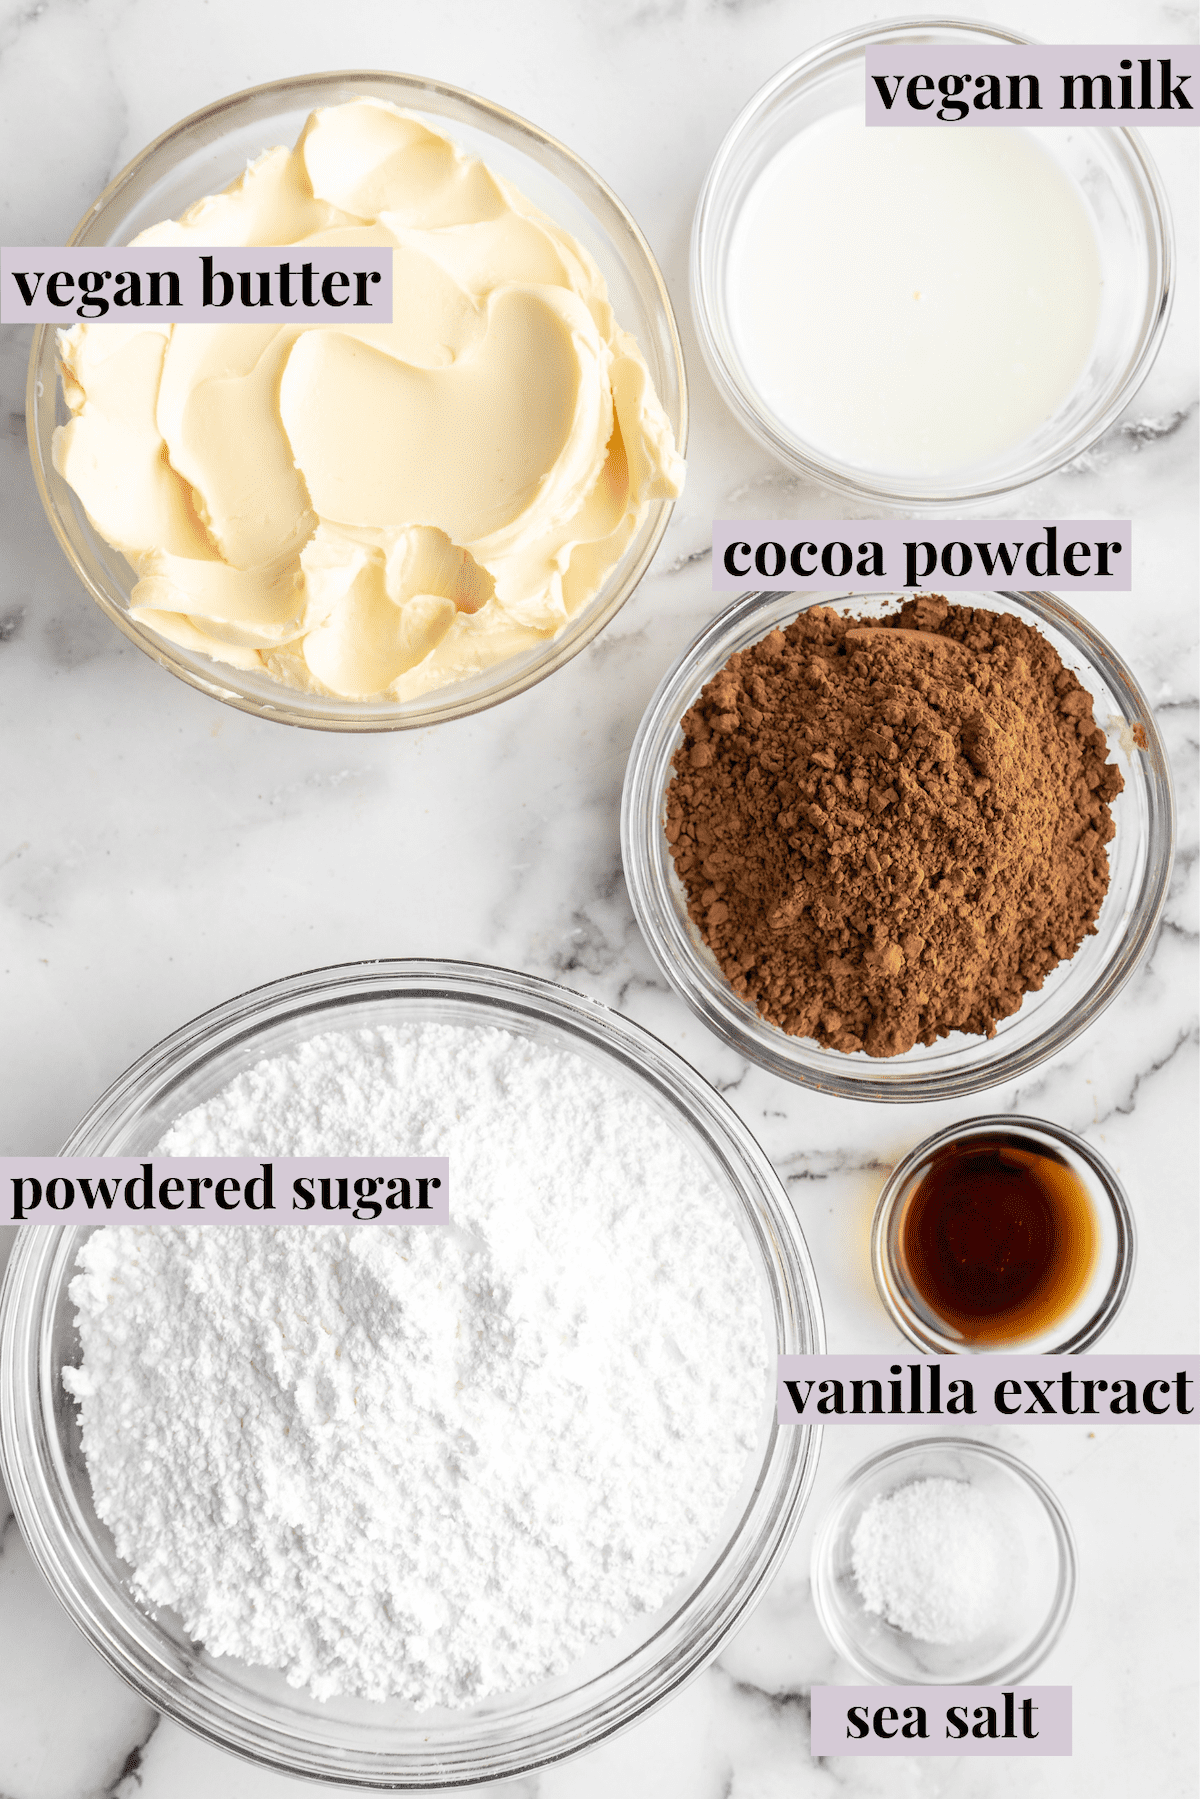 Overhead view of vegan chocolate frosting ingredients with labels